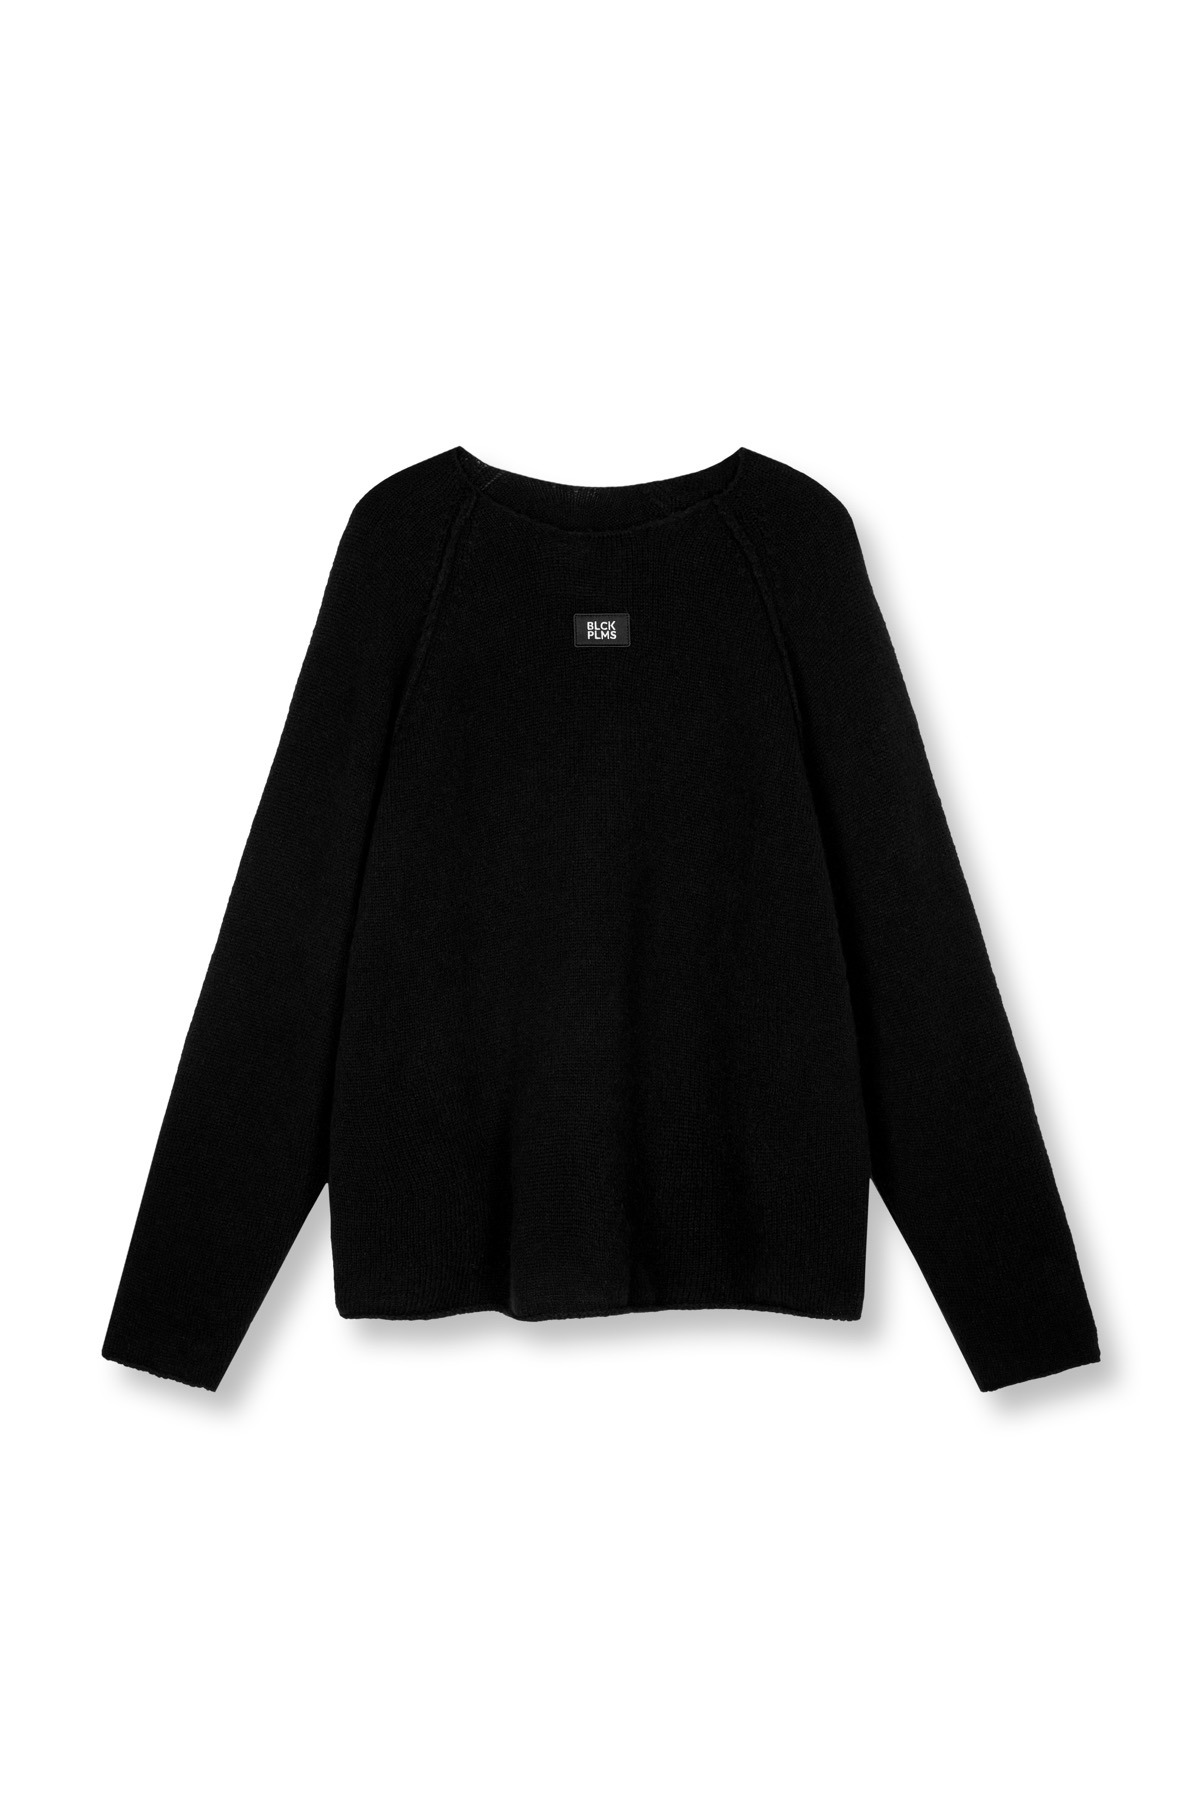 2024_MAEXIN Sweater Black